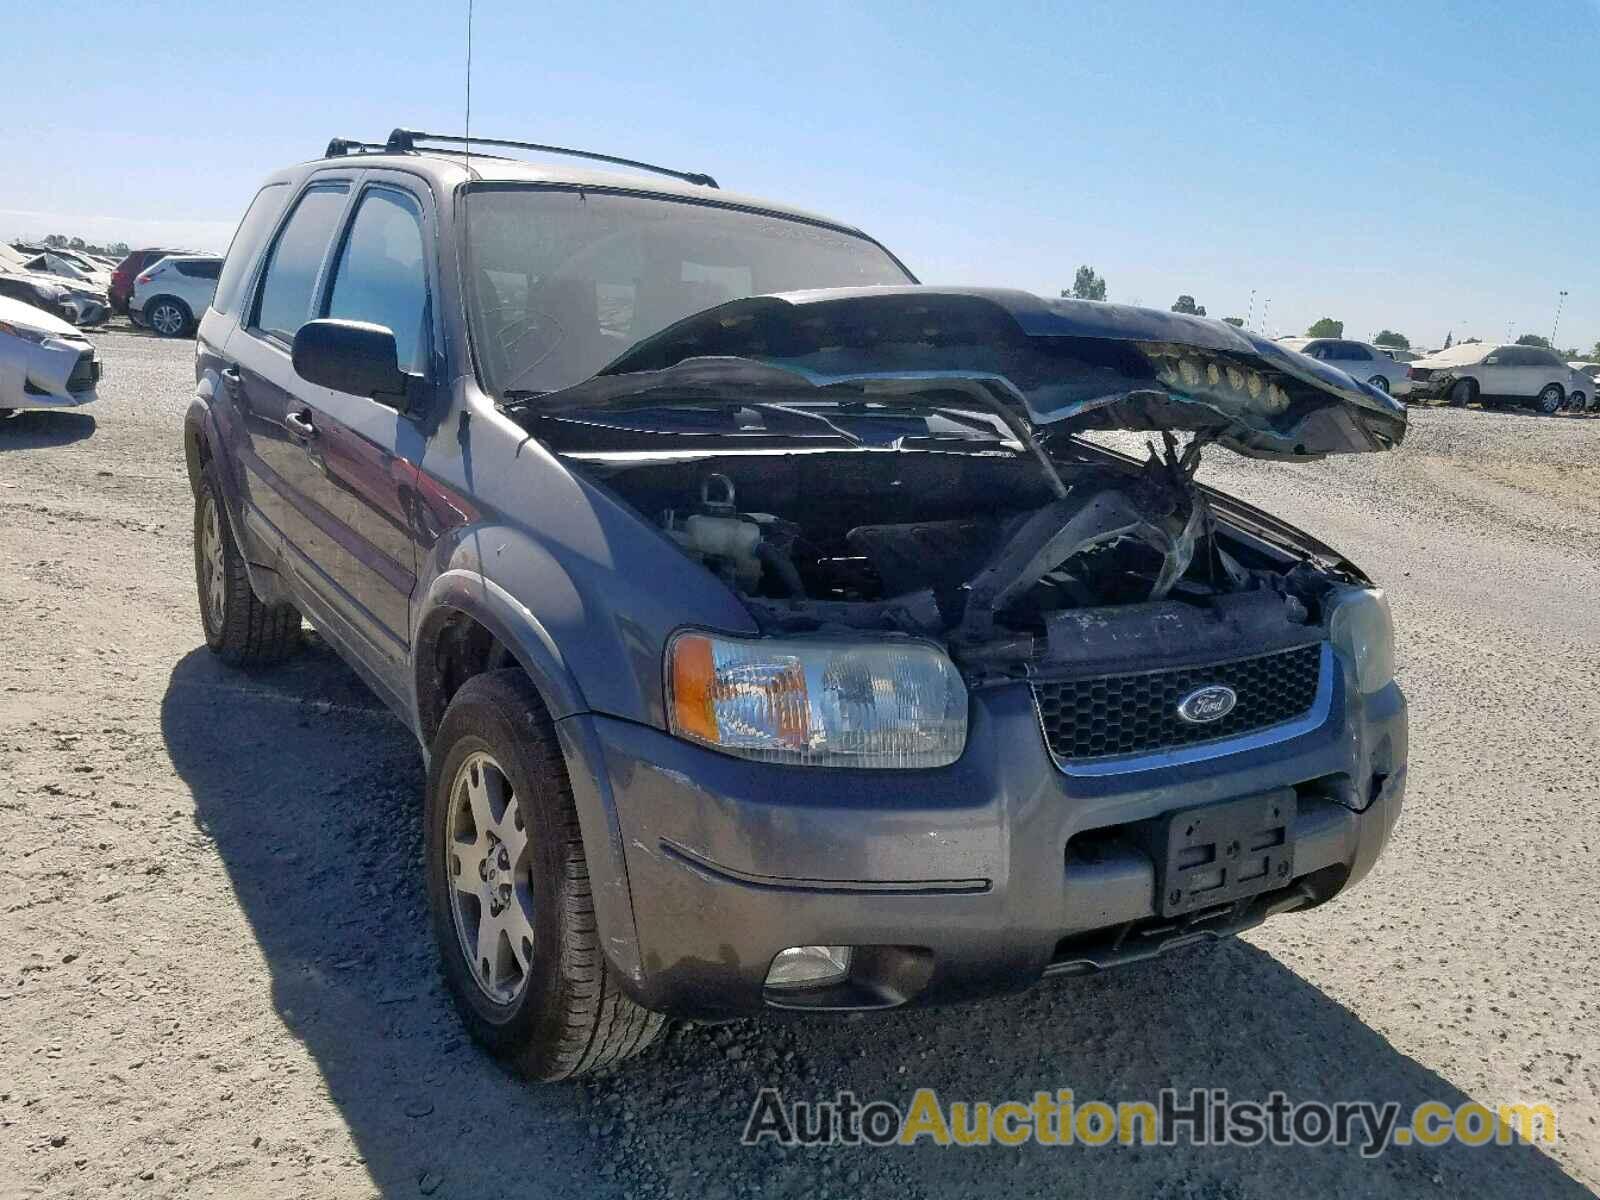 2003 FORD ESCAPE LIMITED, 1FMCU94113KB55427